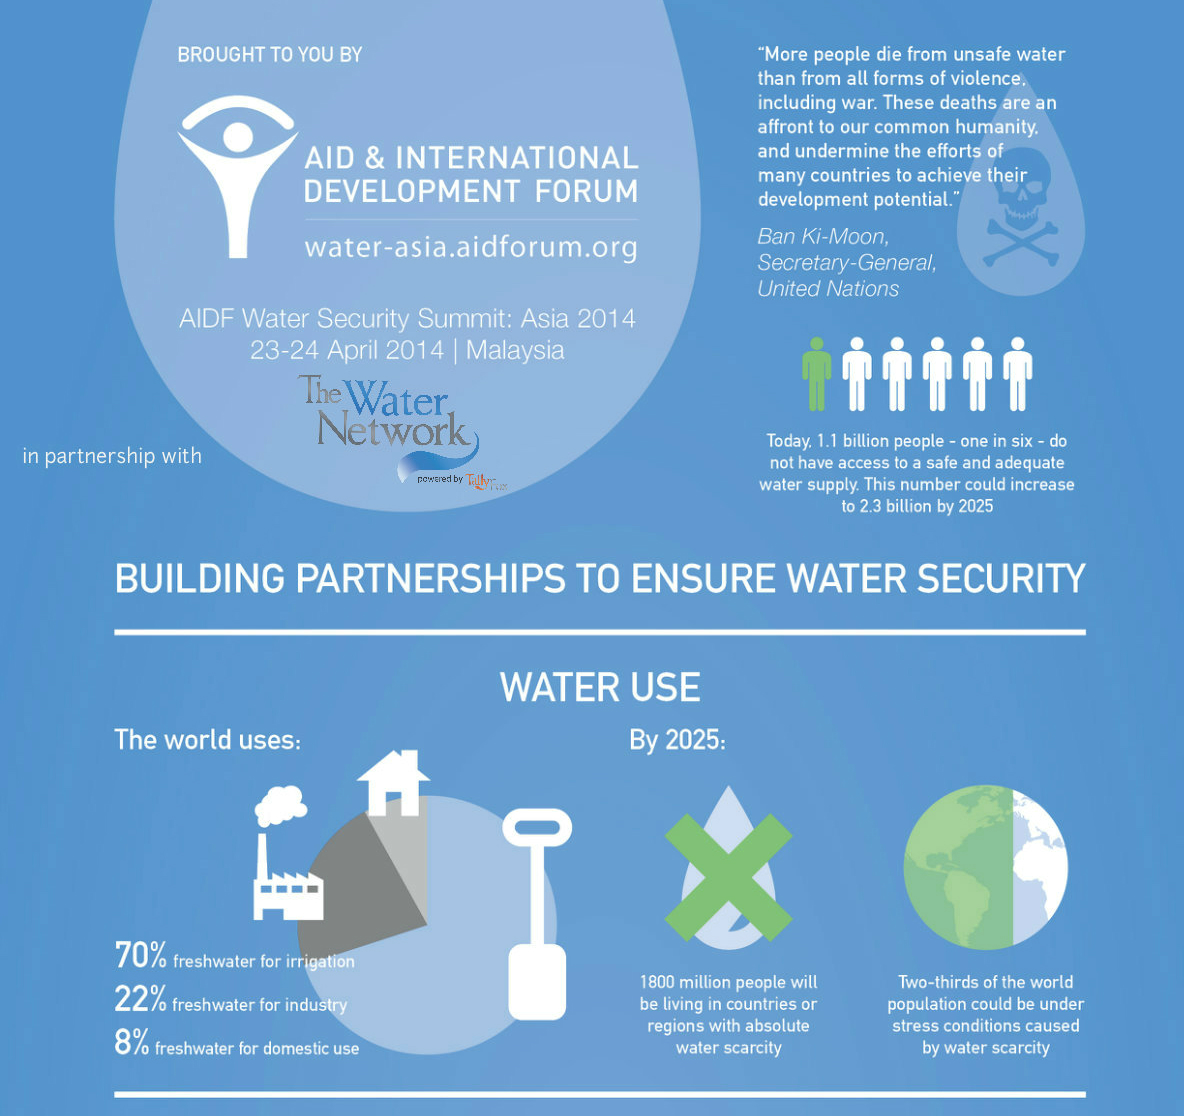 The Water Network and Aid &amp; International Development Forum (AIDF) has partnered for the upcoming "Water Security Summit: Asia 2014". Aid &a...